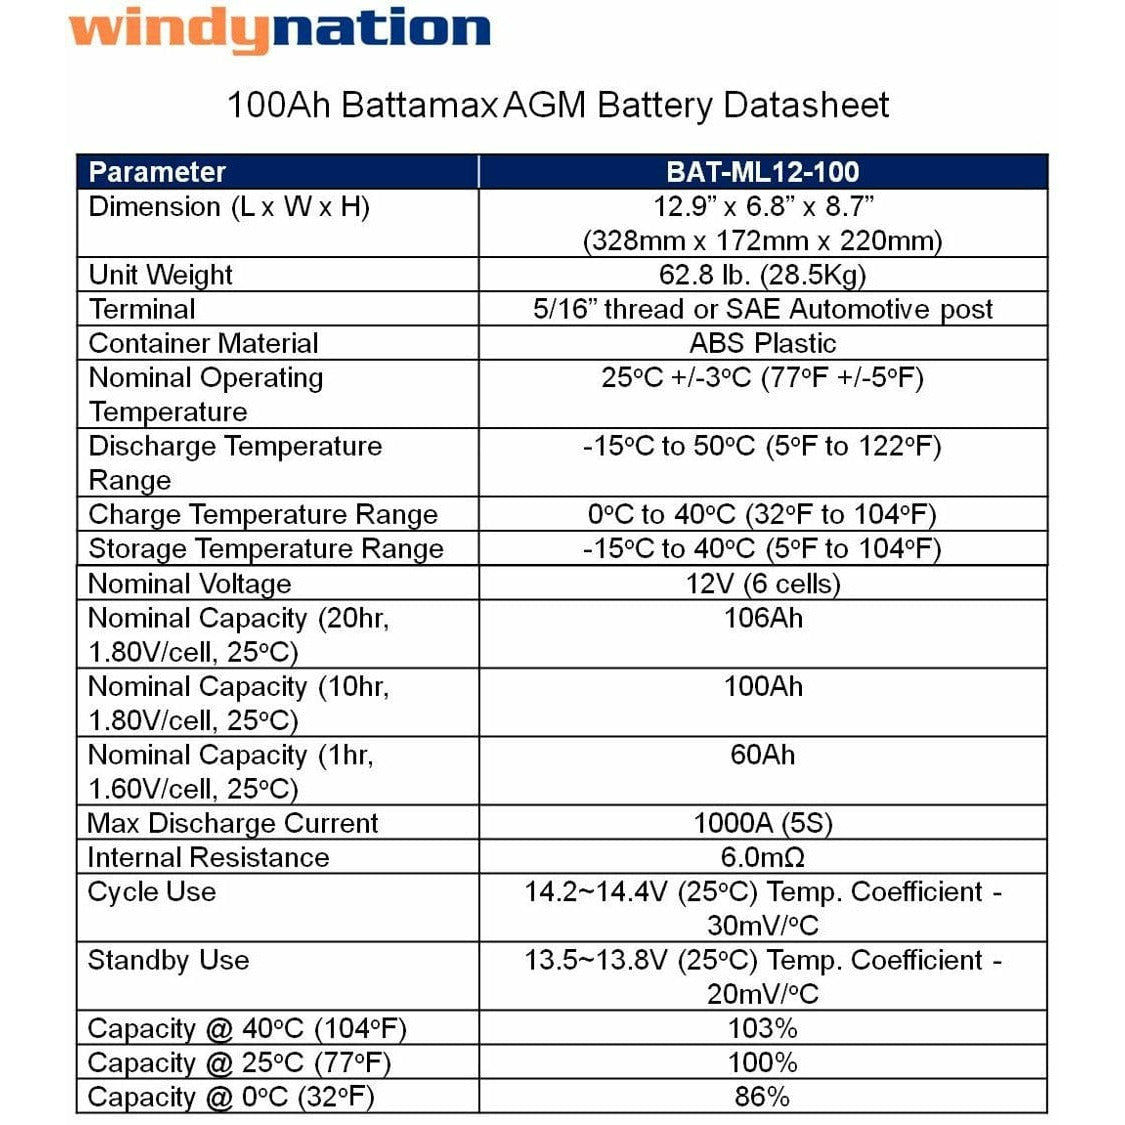 Windy Nation 4x 100Ah Battery + 1x P30L Charge Controller + 1x 1500W Inverter + 4x 100W Monocrystalline Solar Panel Complete Kit